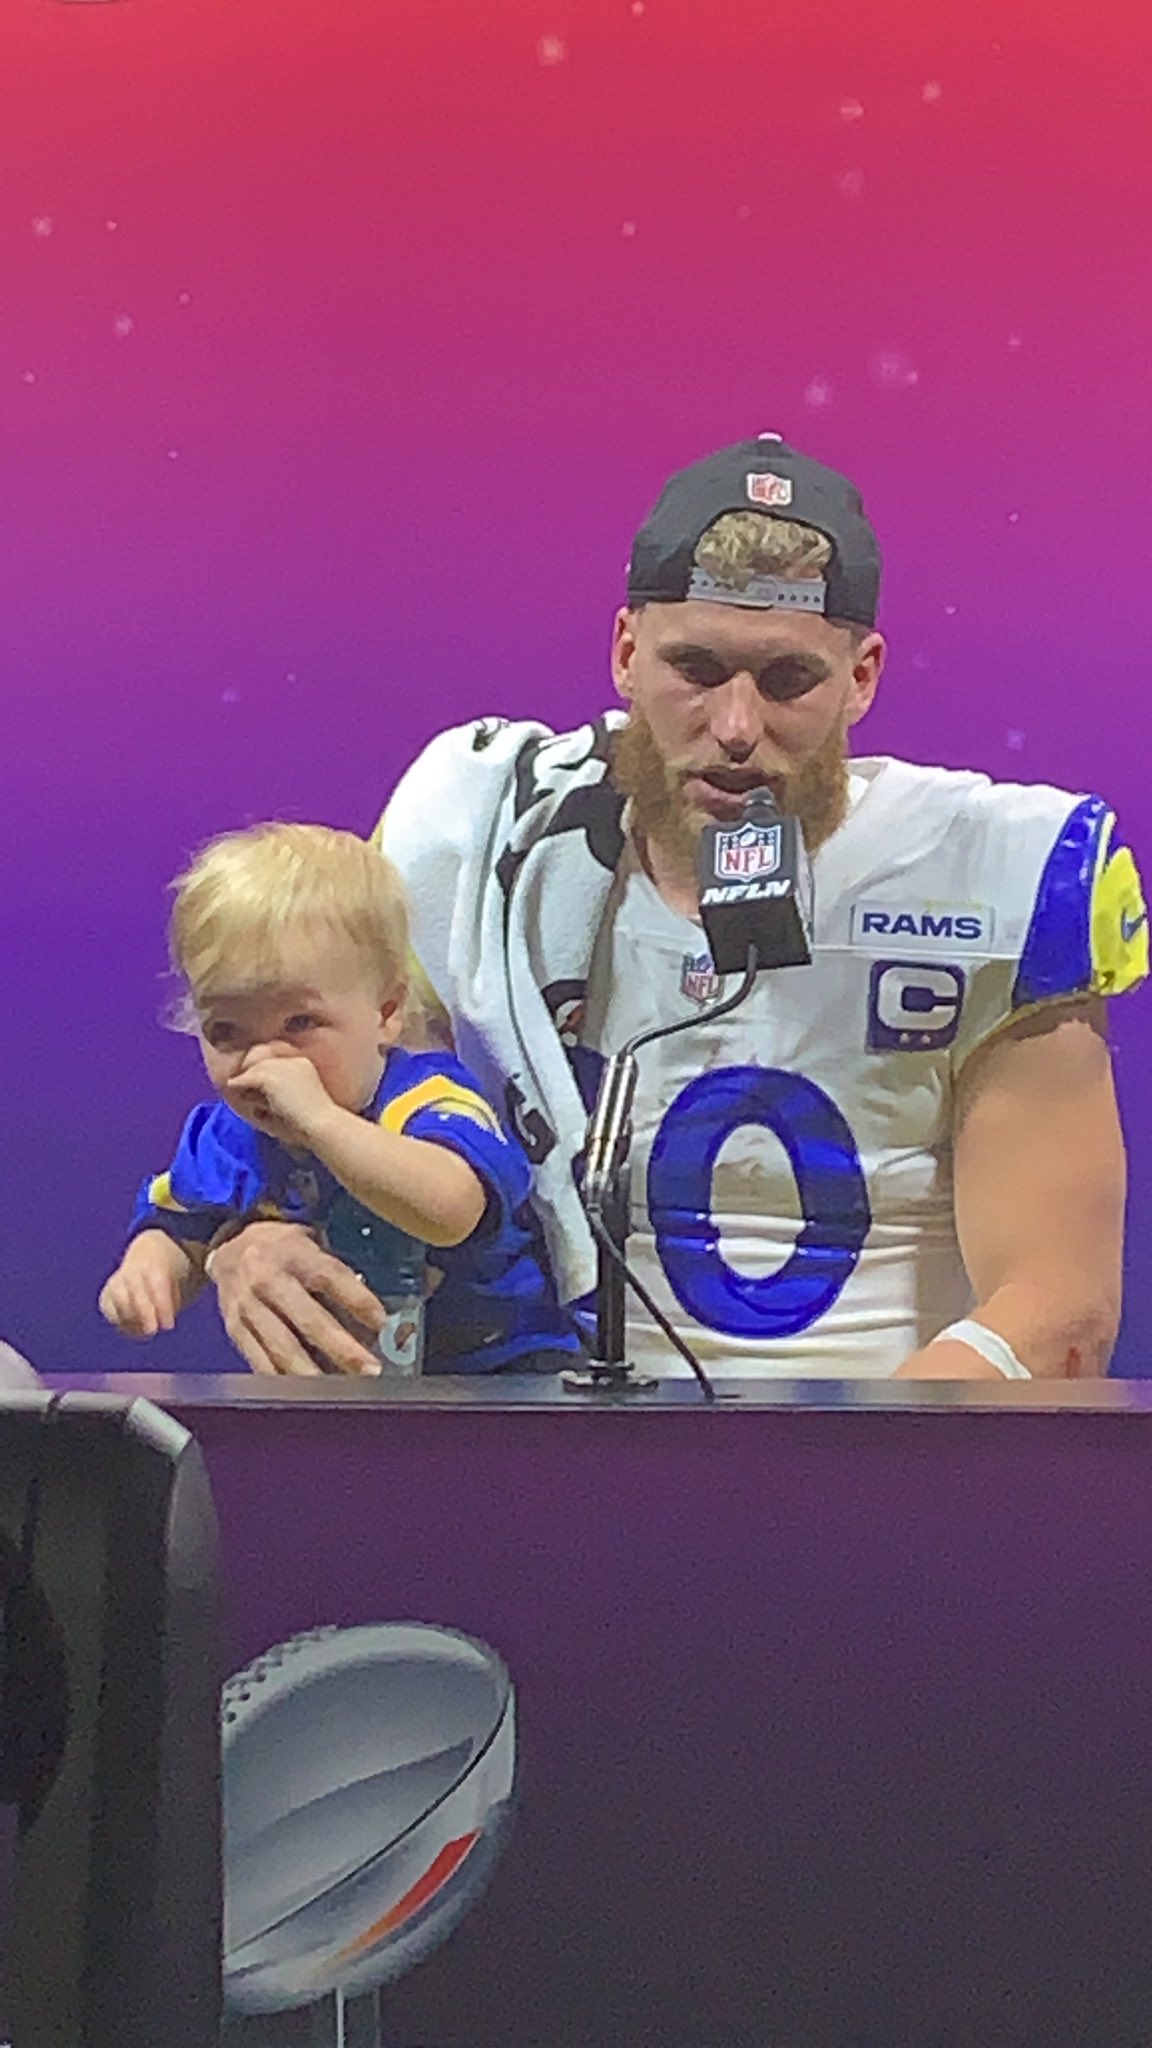 Benjamin Solak on X: Cooper Kupp is talking about a “vision from God” he  received after the Super Bowl loss that he would win Super Bowl MVP. Cooper  Kupp's daughter is trying